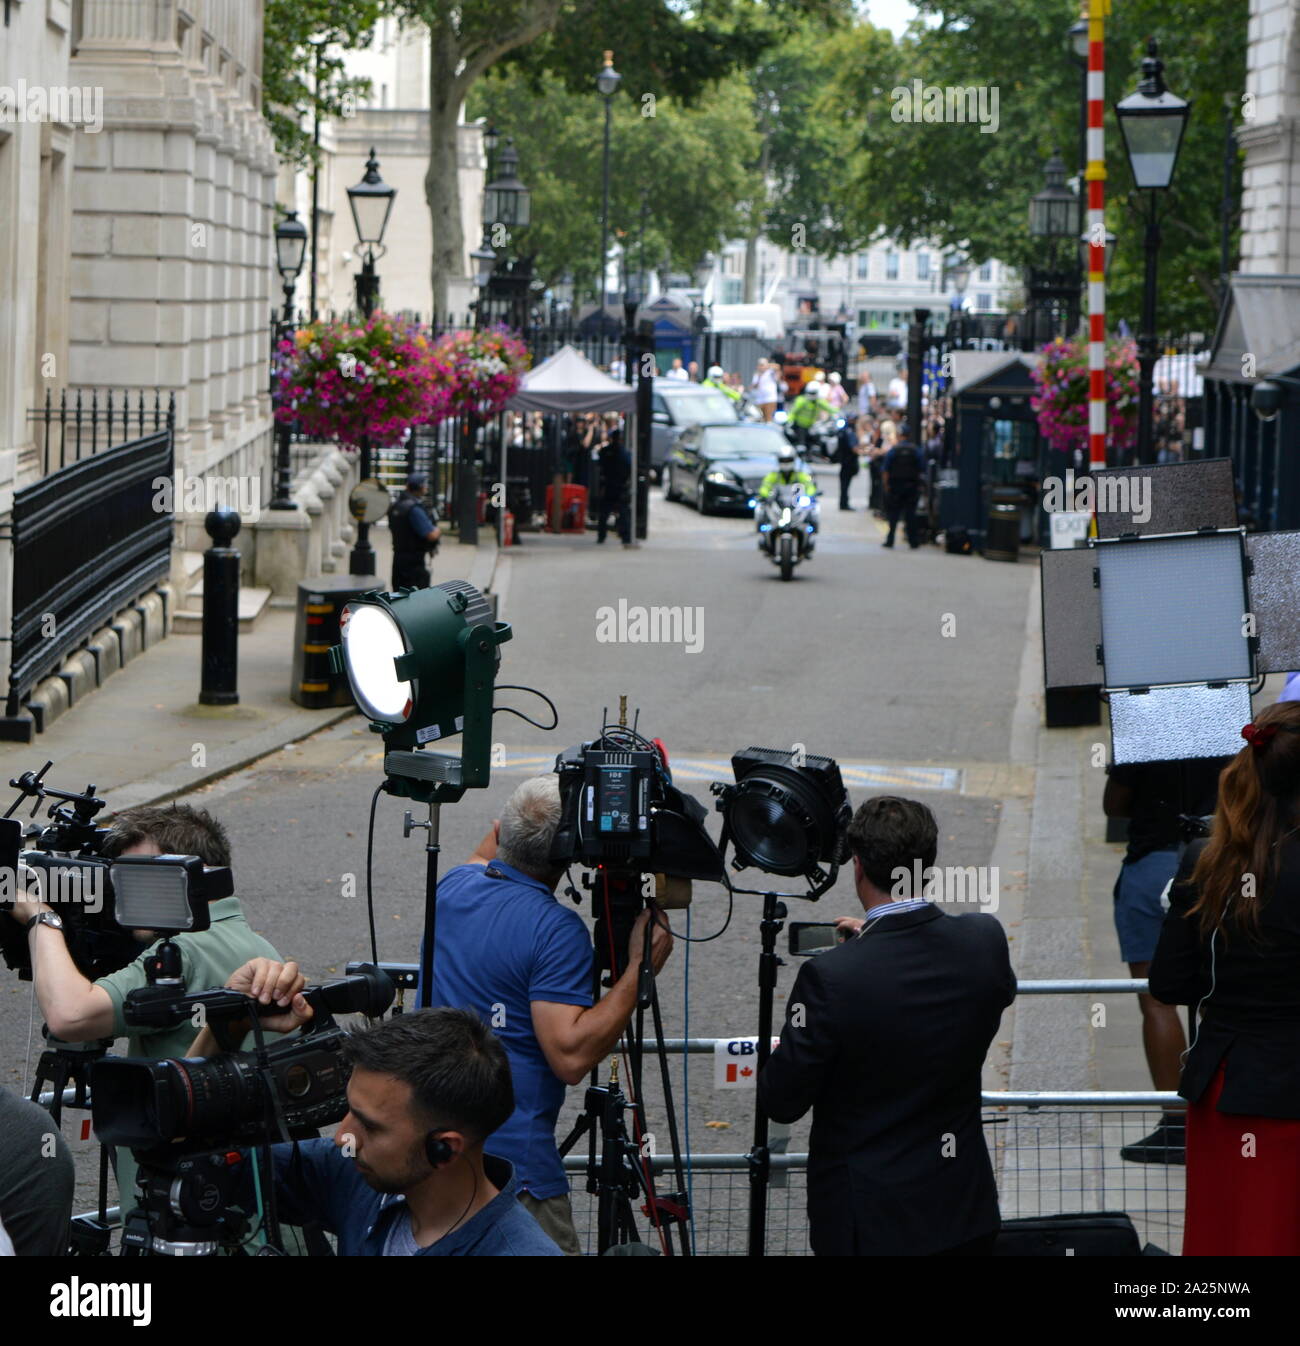 Theresa may arrives in downing street, london fro the last day of her premiership. theresa may, prime minister of the united kingdom, 13 july 2016 - 24 july 2019. may was leader of the conservative party from july 2016 - 23 july 2019 Stock Photo